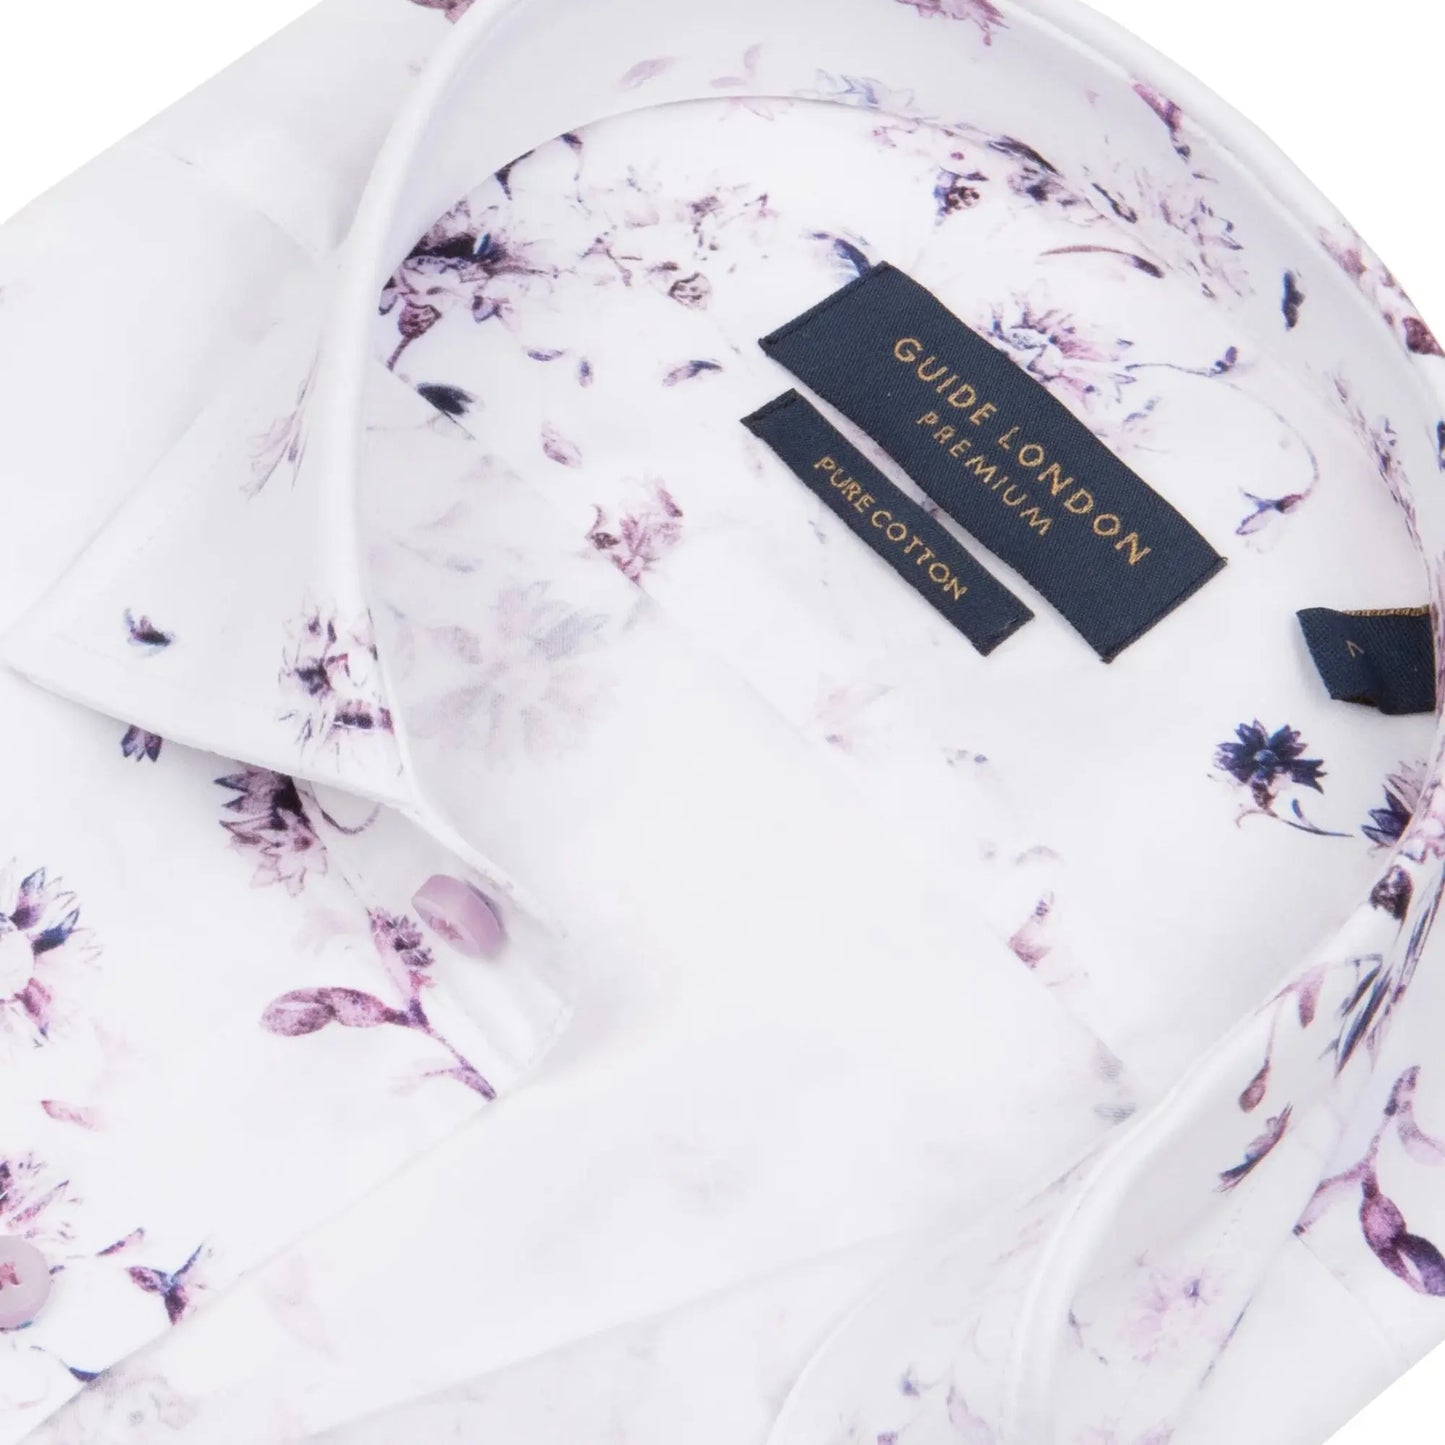 Buy Guide London Floral Print Shirt - Pink/White | Long-Sleeved Shirtss at Woven Durham